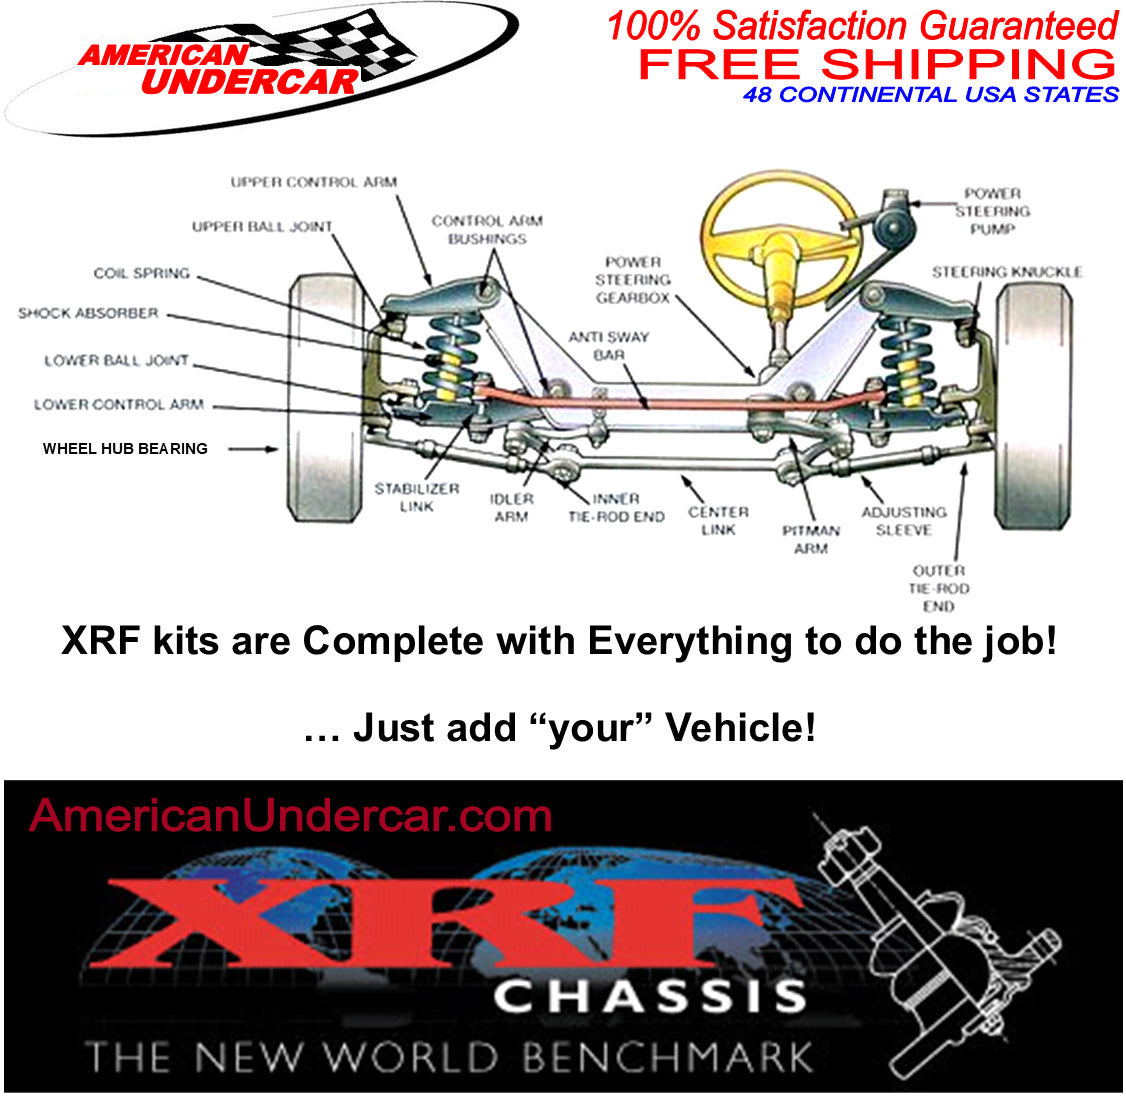 XRF Ford F550 Super Duty Ball Joint Upper & Lower Suspension Kit 1999 - 2004 4x4